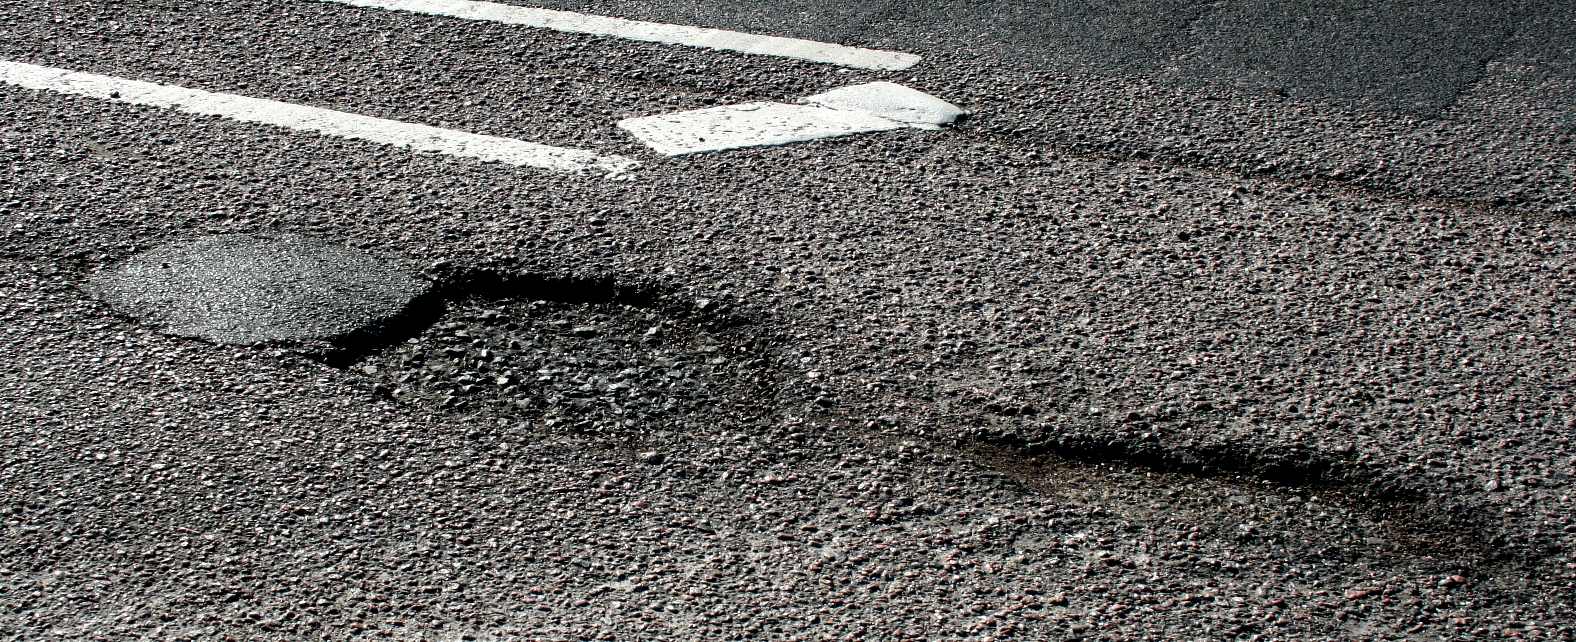 Pothole politics is straining existing infrastructure to breaking point